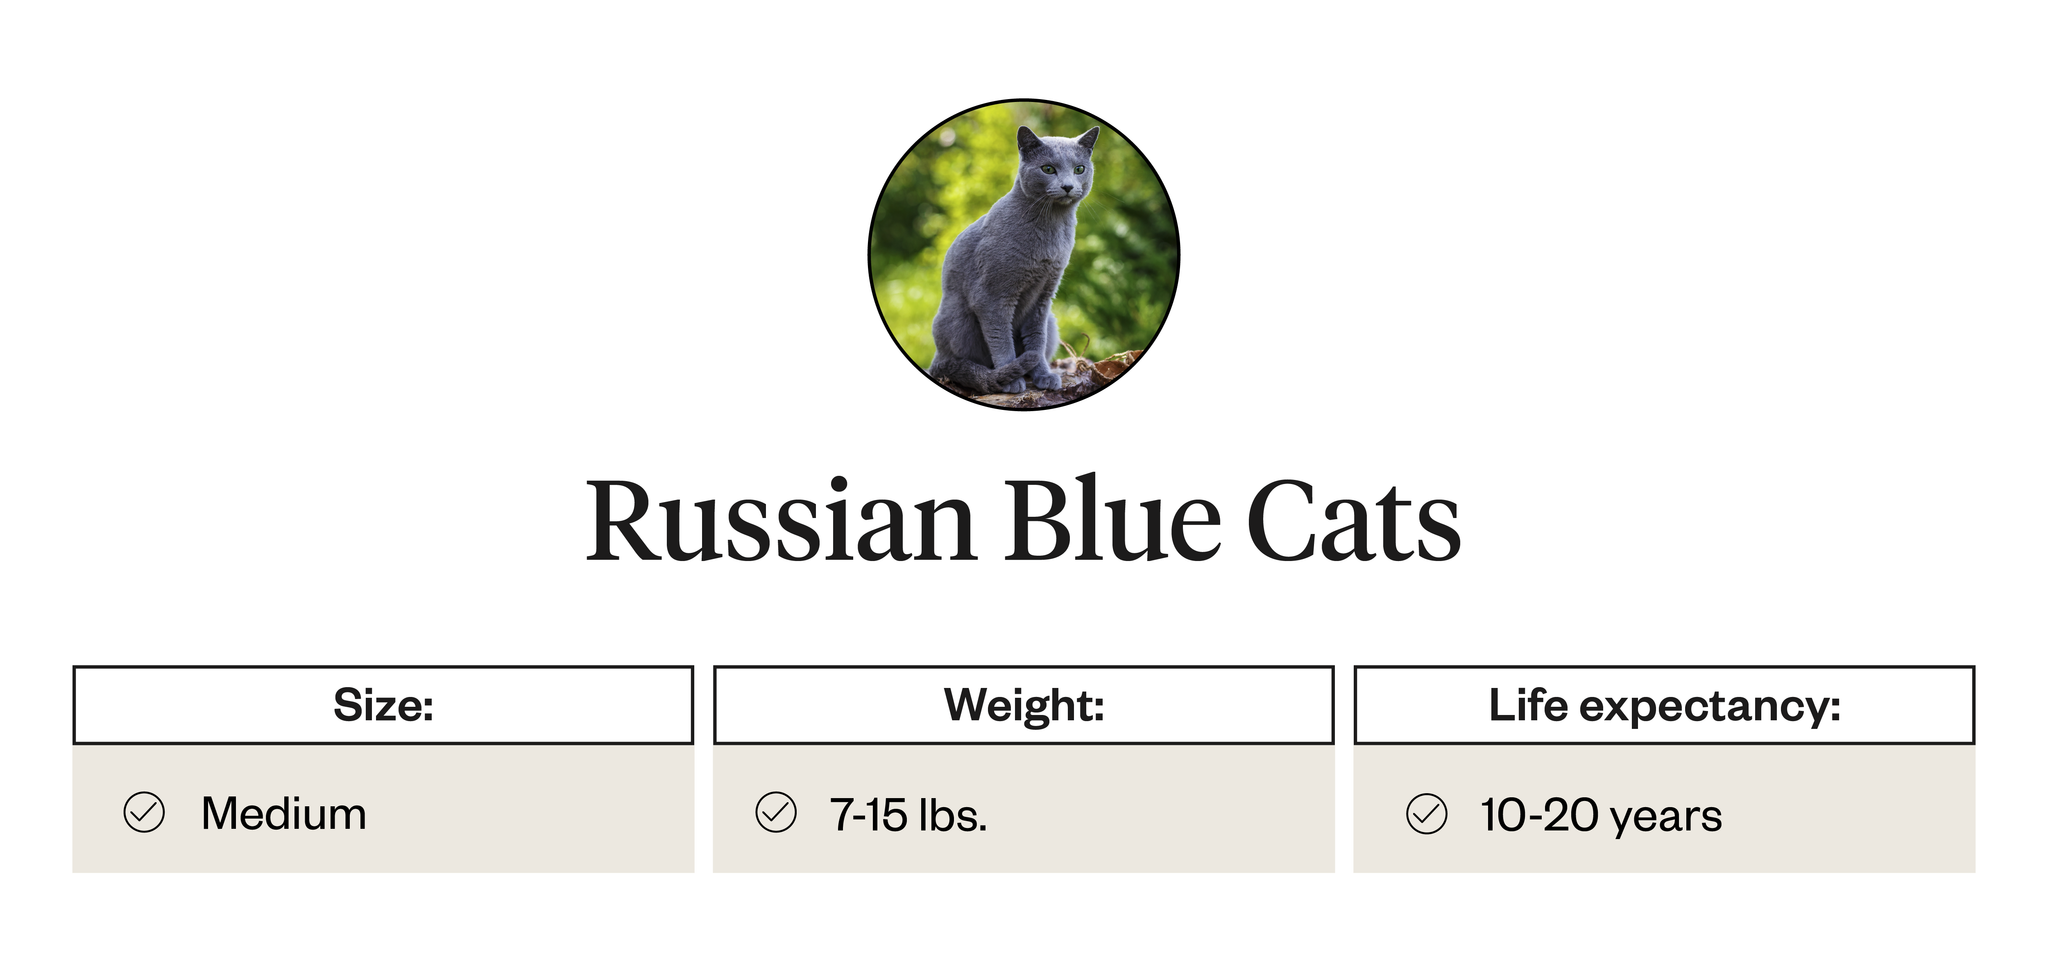 Physical attributes of Russian blue cats